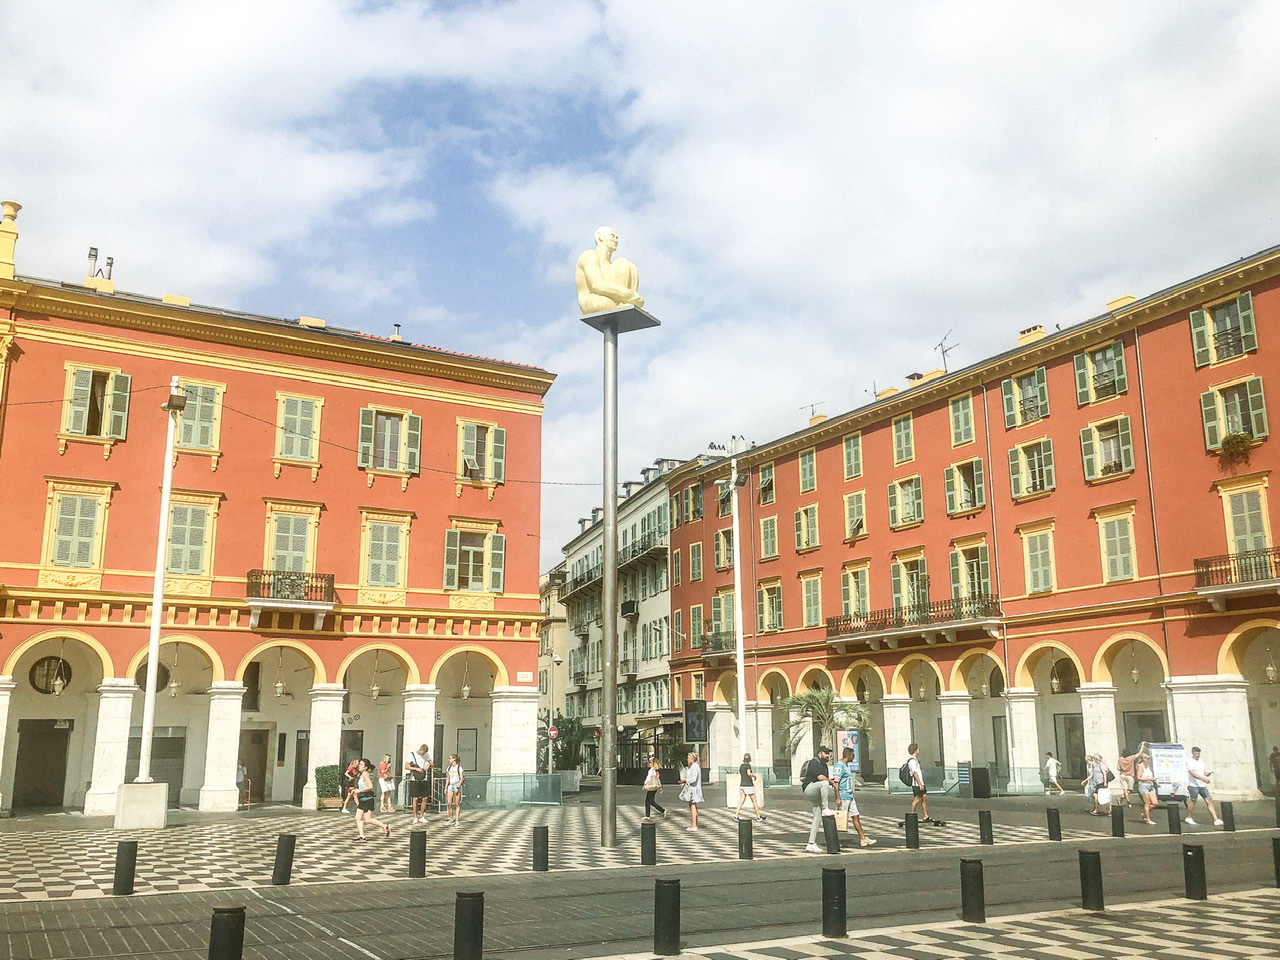 three light post sculptures and two pink buildings in Place Massena Nice